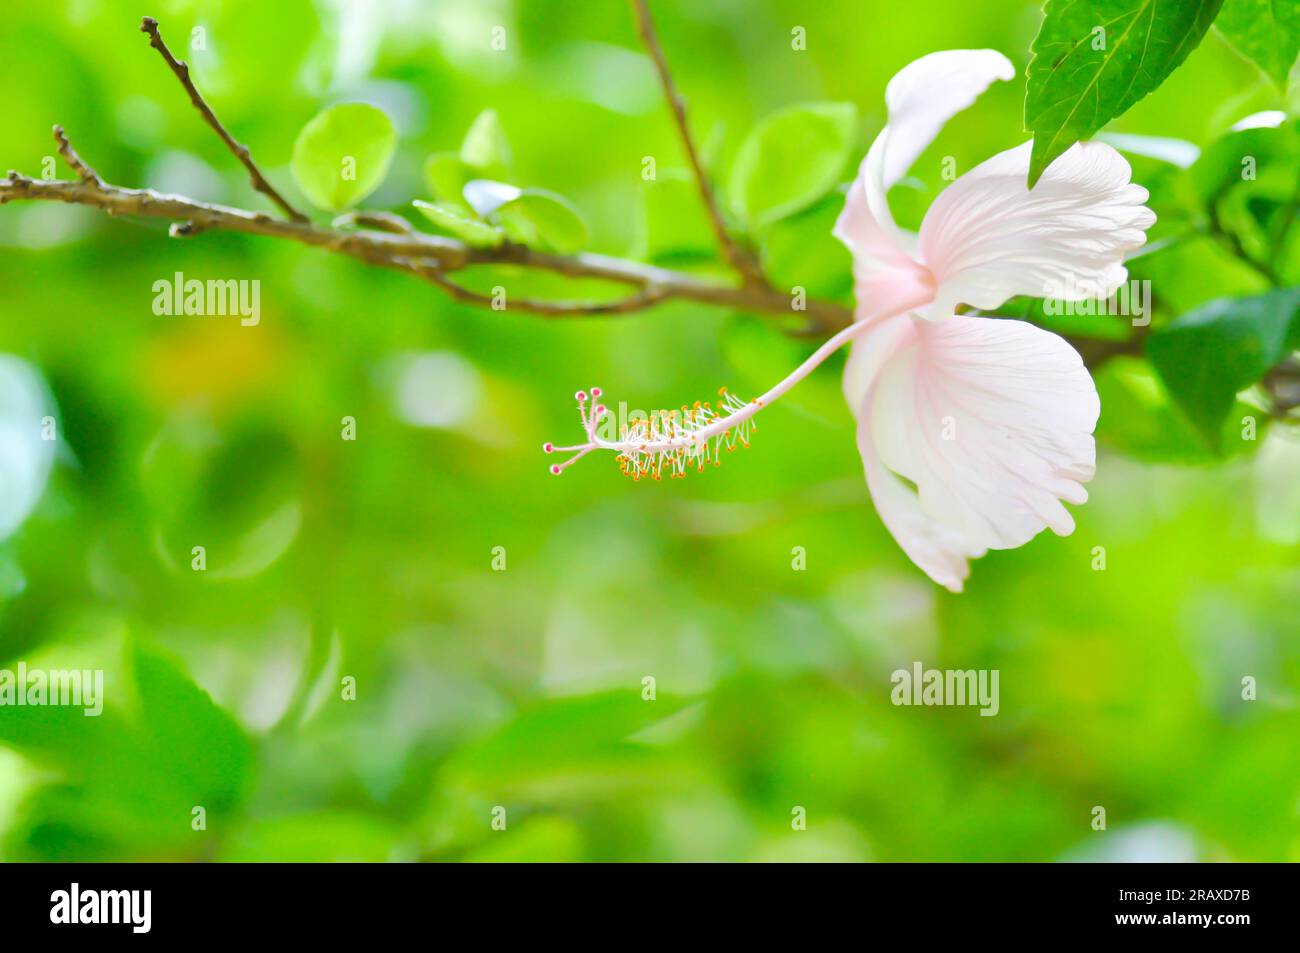 Chinese rose or Hibiscus or pink flower Stock Photo